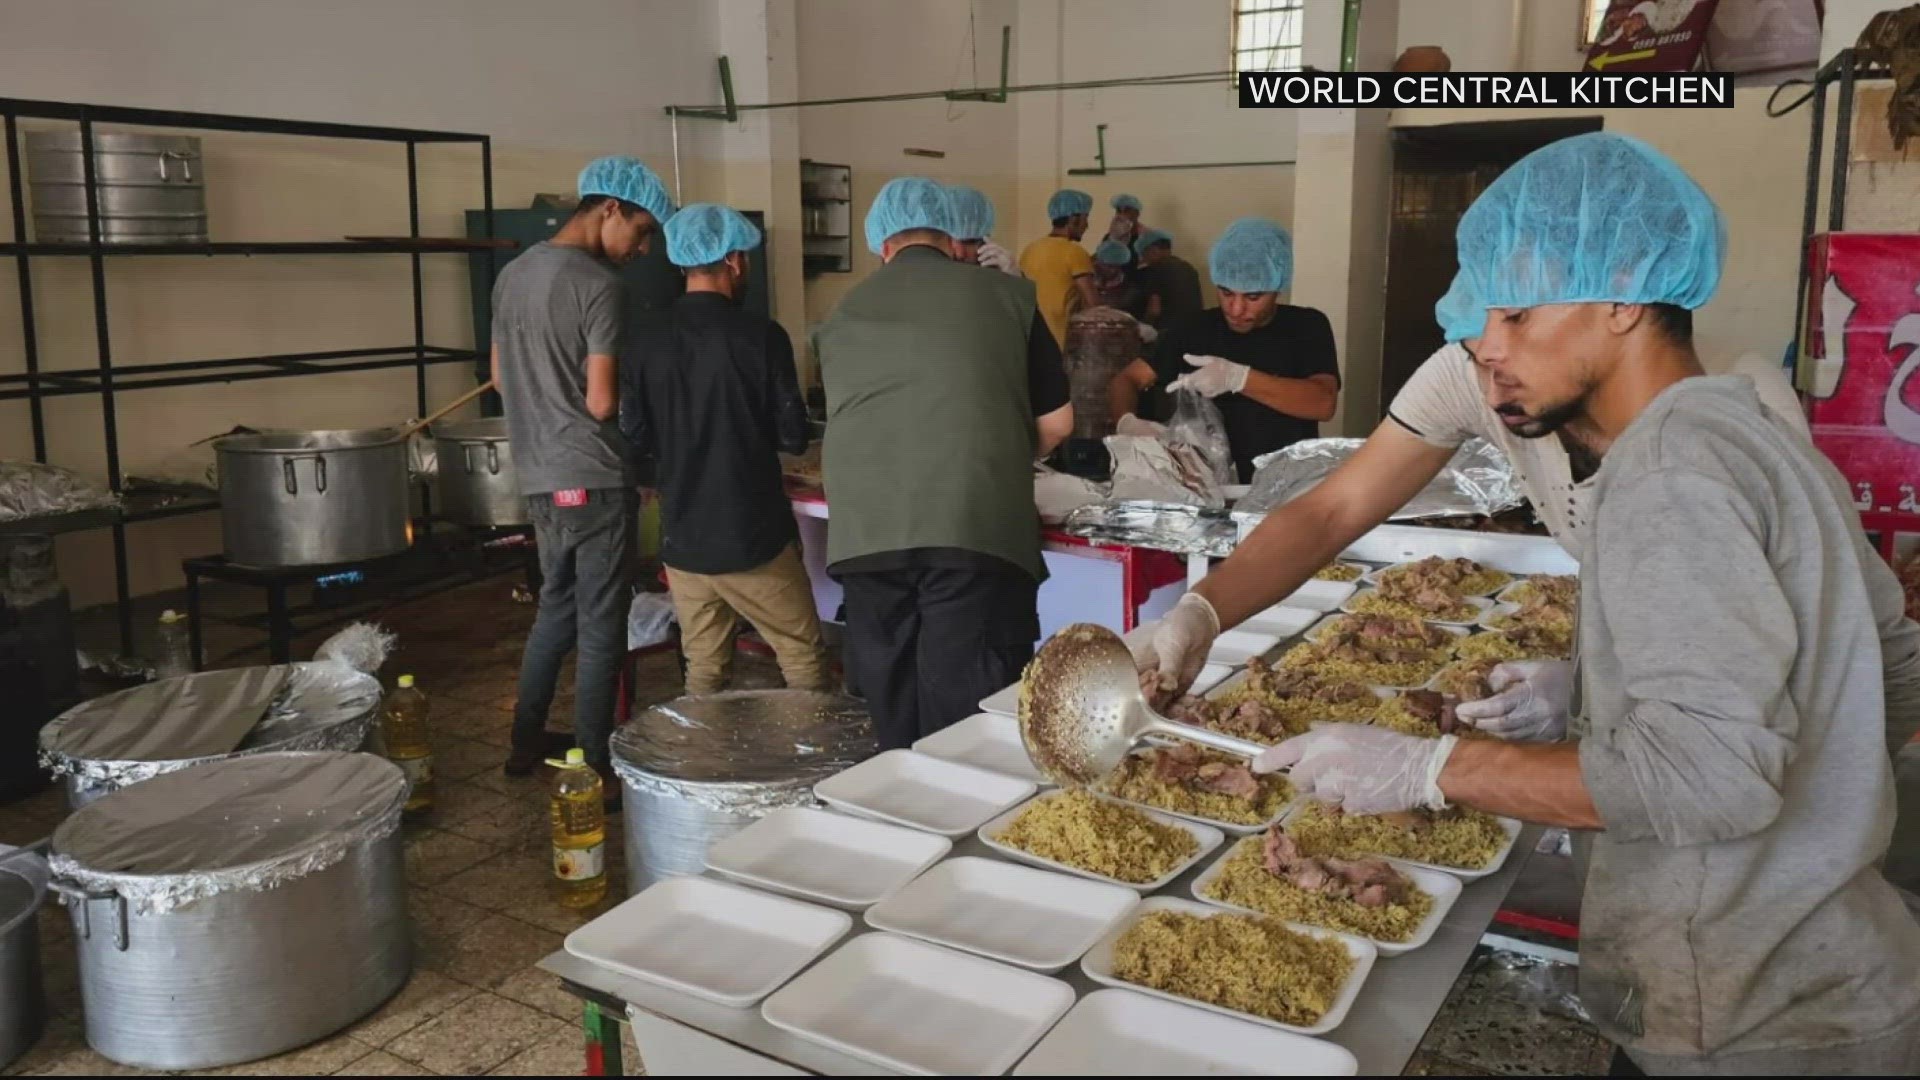 The chef's organization World Central Kitchen is serving up hot plates to people across Israel and Palestinian families fleeing Gaza.